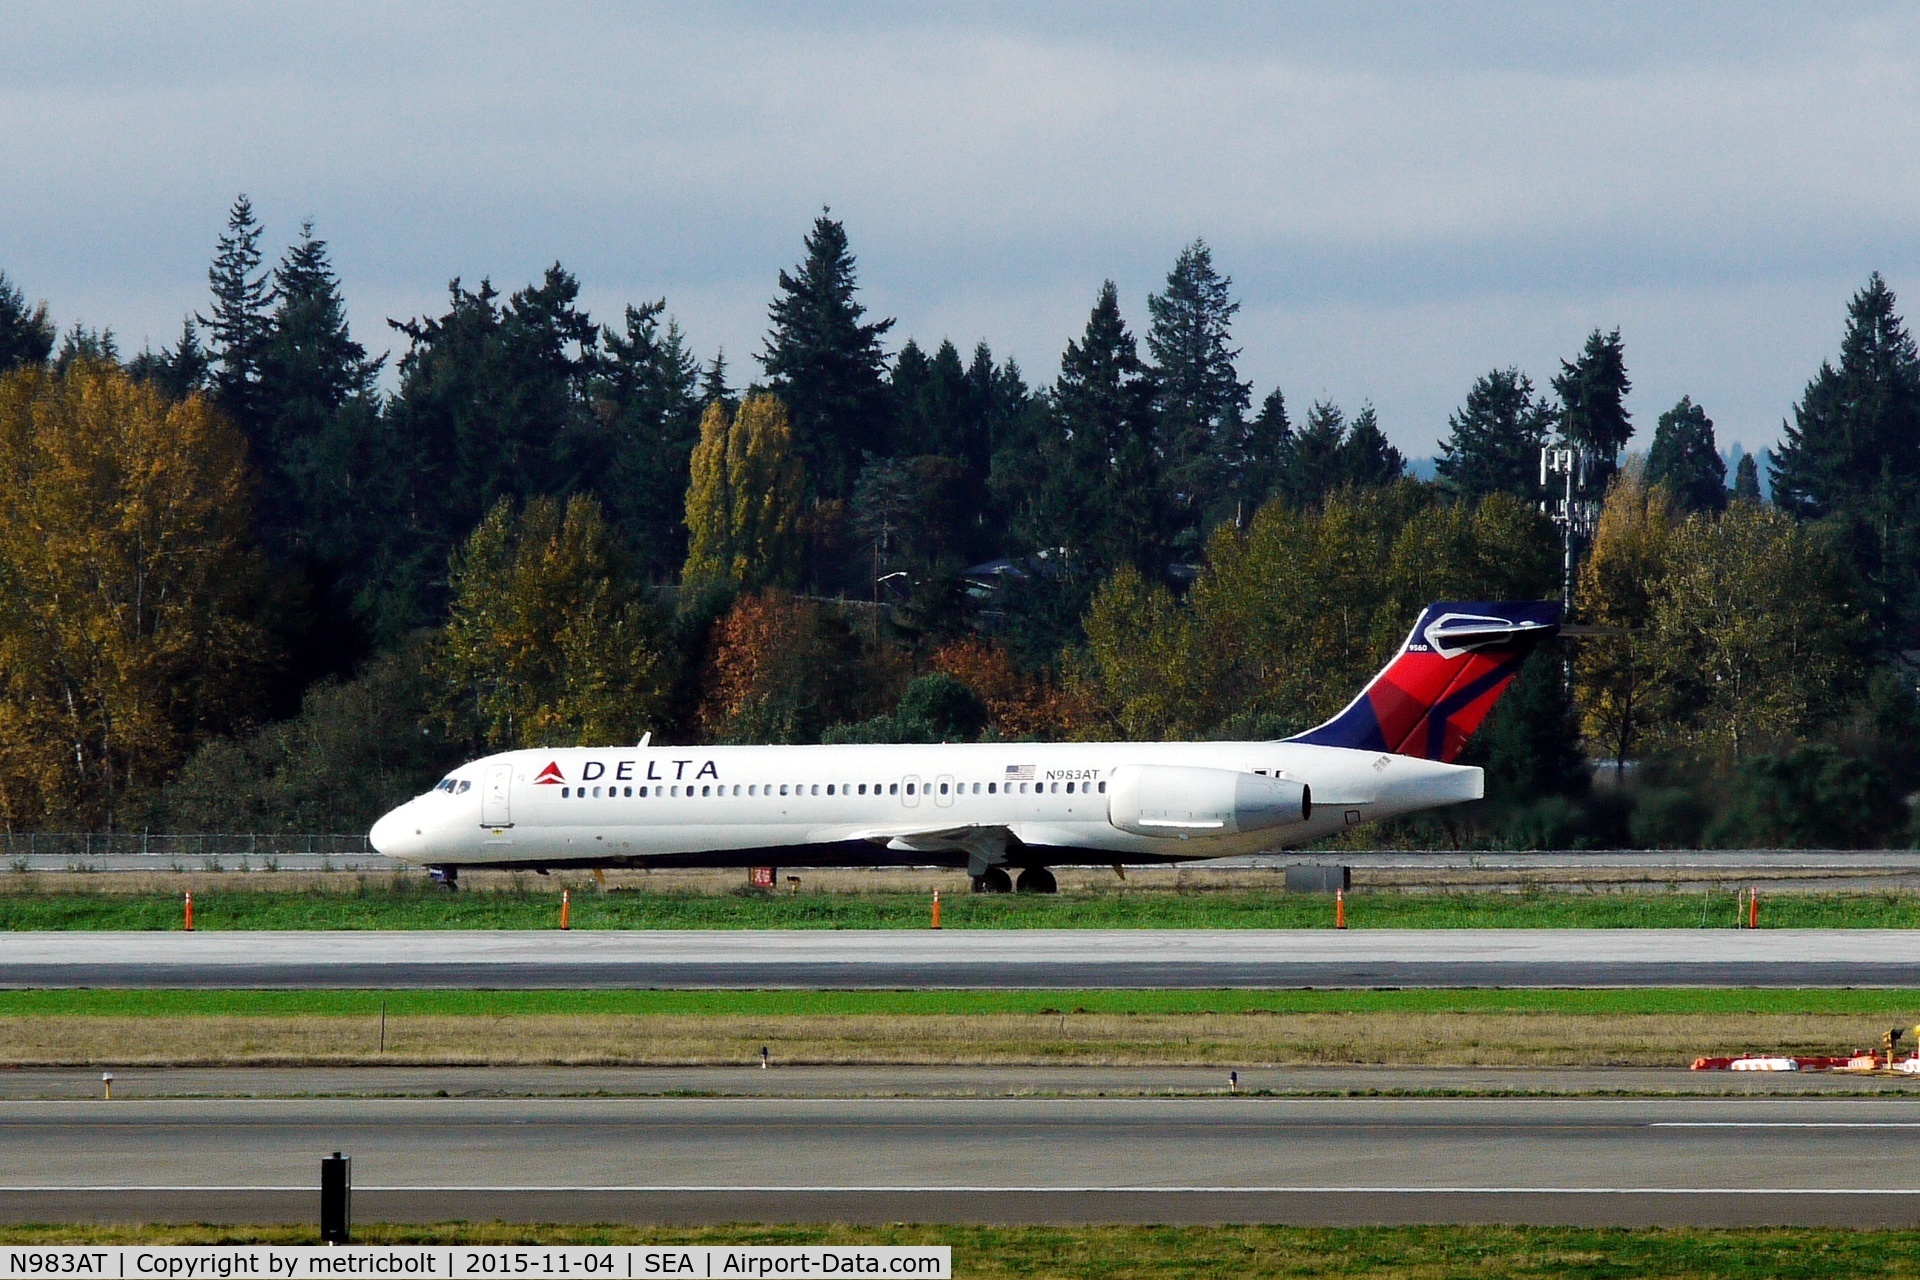 N983AT, 2005 Boeing 717-200 C/N 55052, Now in Delta colours